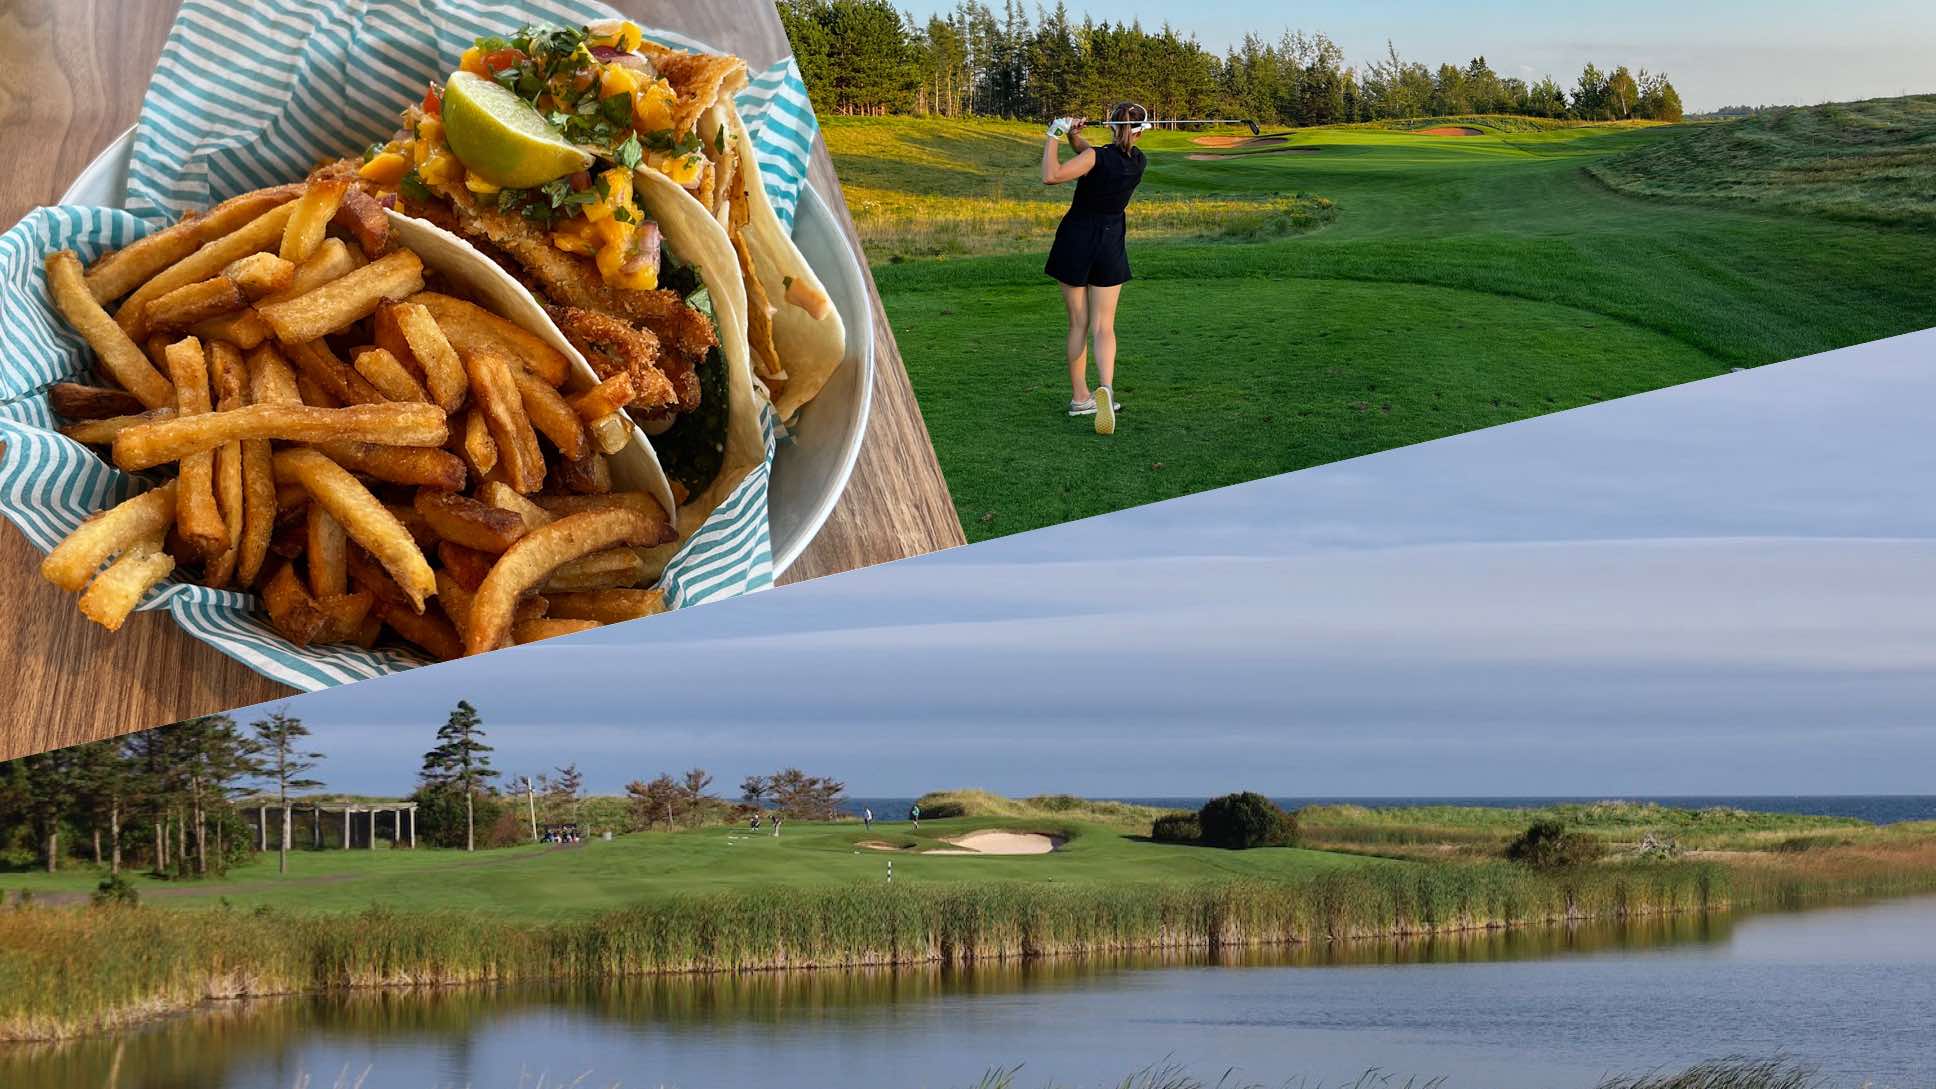 PEI Food and Golf